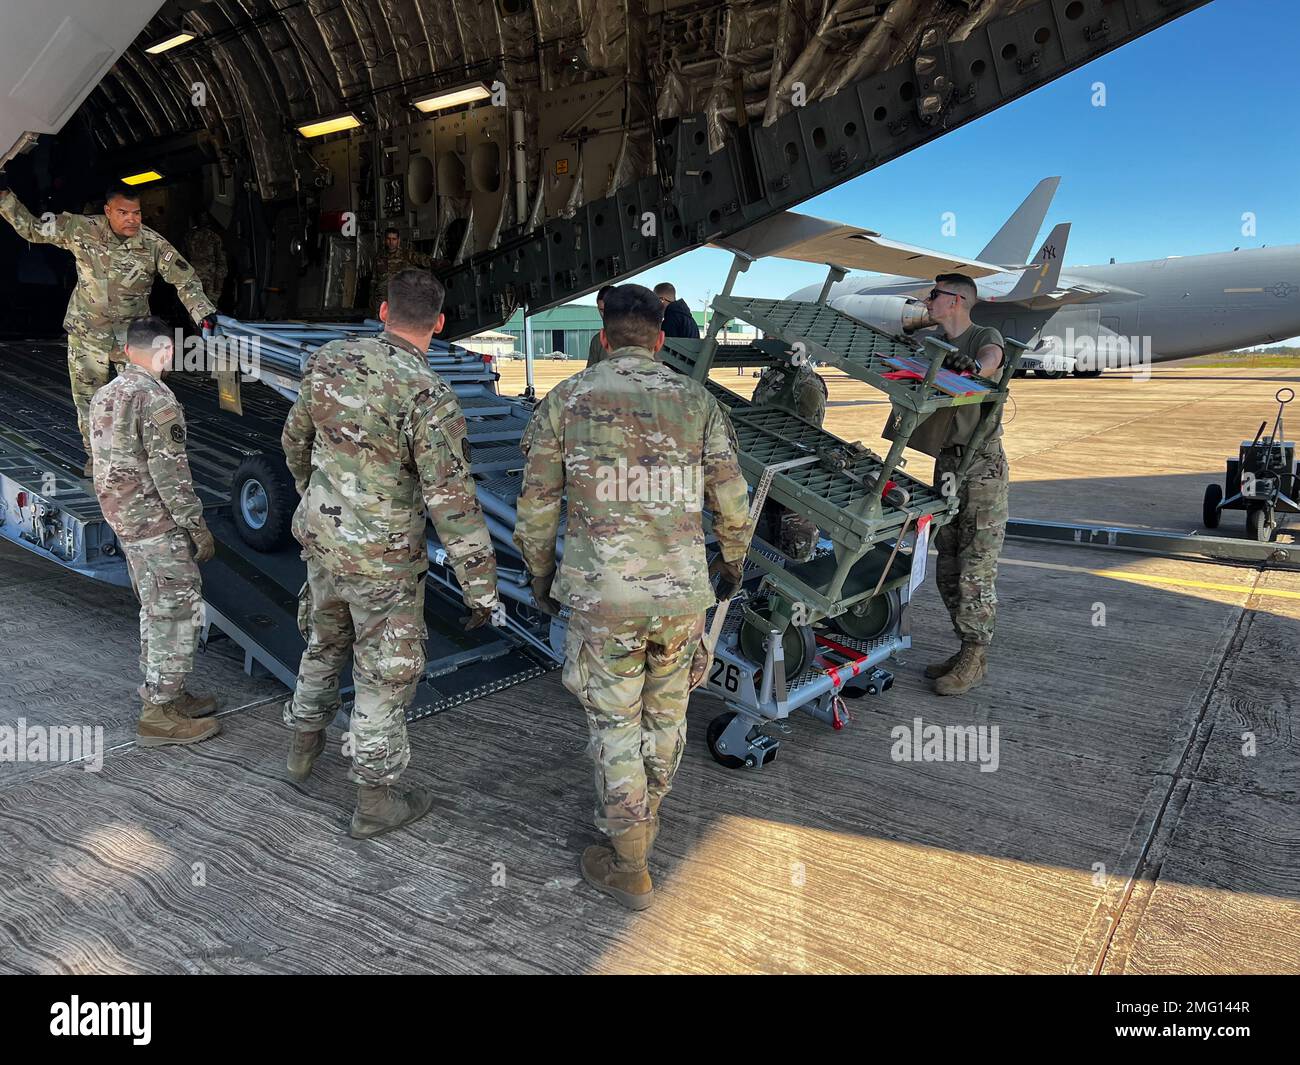 https://c8.alamy.com/comp/2MG144R/airmen-assigned-to-the-new-york-air-national-guards-106th-rescue-work-with-members-of-the-new-york-air-national-guards-105th-airlift-wing-to-offload-106th-hh-60-pave-hawk-search-and-rescue-helicopters-from-105th-c-17s-at-a-brazilian-air-force-base-in-campo-grande-brazil-on-august-20-2022-the-airmen-were-in-brazil-to-participate-in-exercise-tapio-a-combined-brazilian-us-irregular-warfare-exercise-in-campo-grade-brazil-the-new-york-air-national-guard-dispatched-100-airmen-from-the-two-wings-to-participate-as-part-of-the-state-partnership-program-relationship-with-brazil-2MG144R.jpg